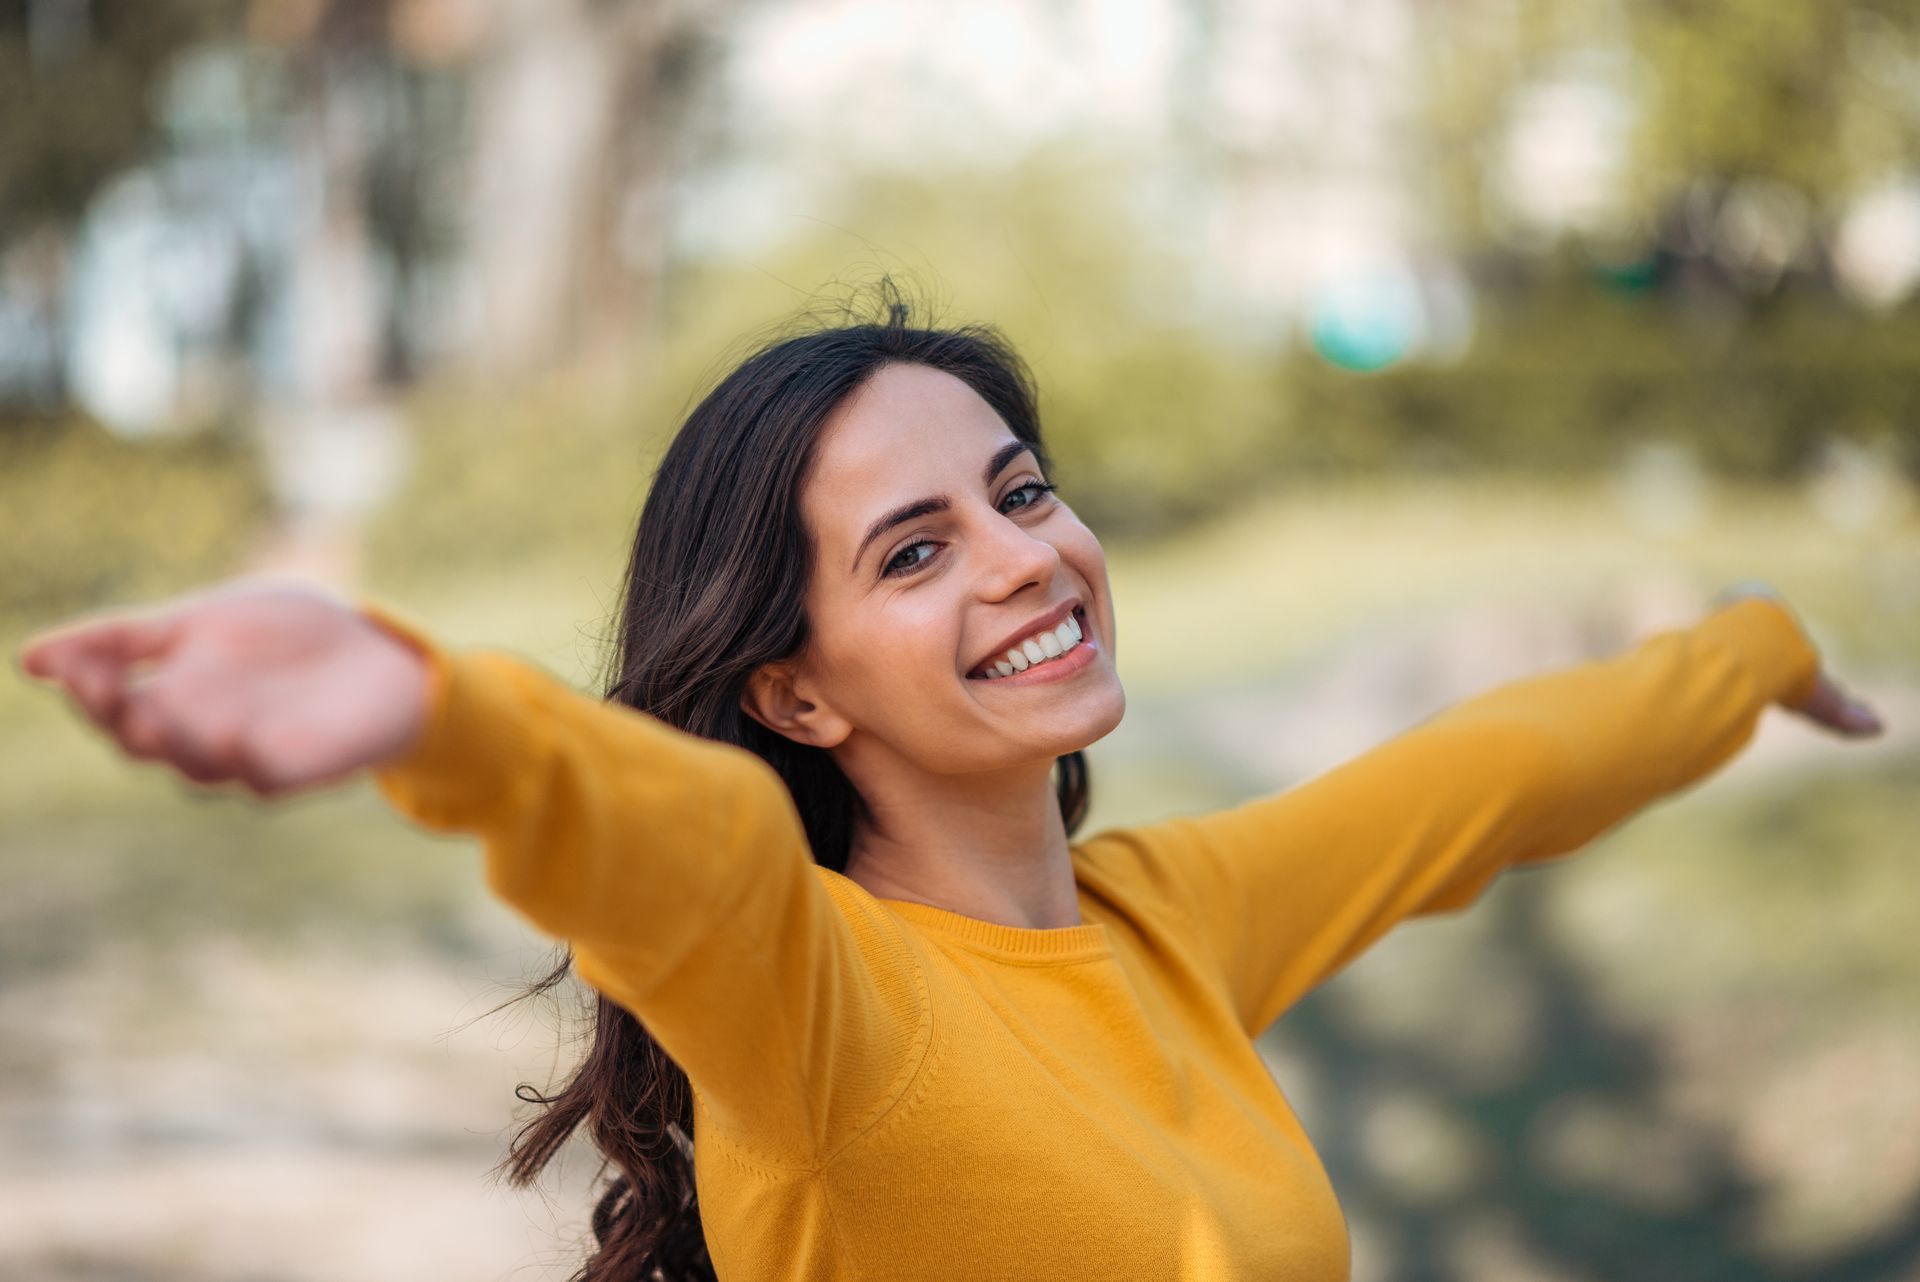 A woman in a yellow sweater is smiling with her arms outstretched.